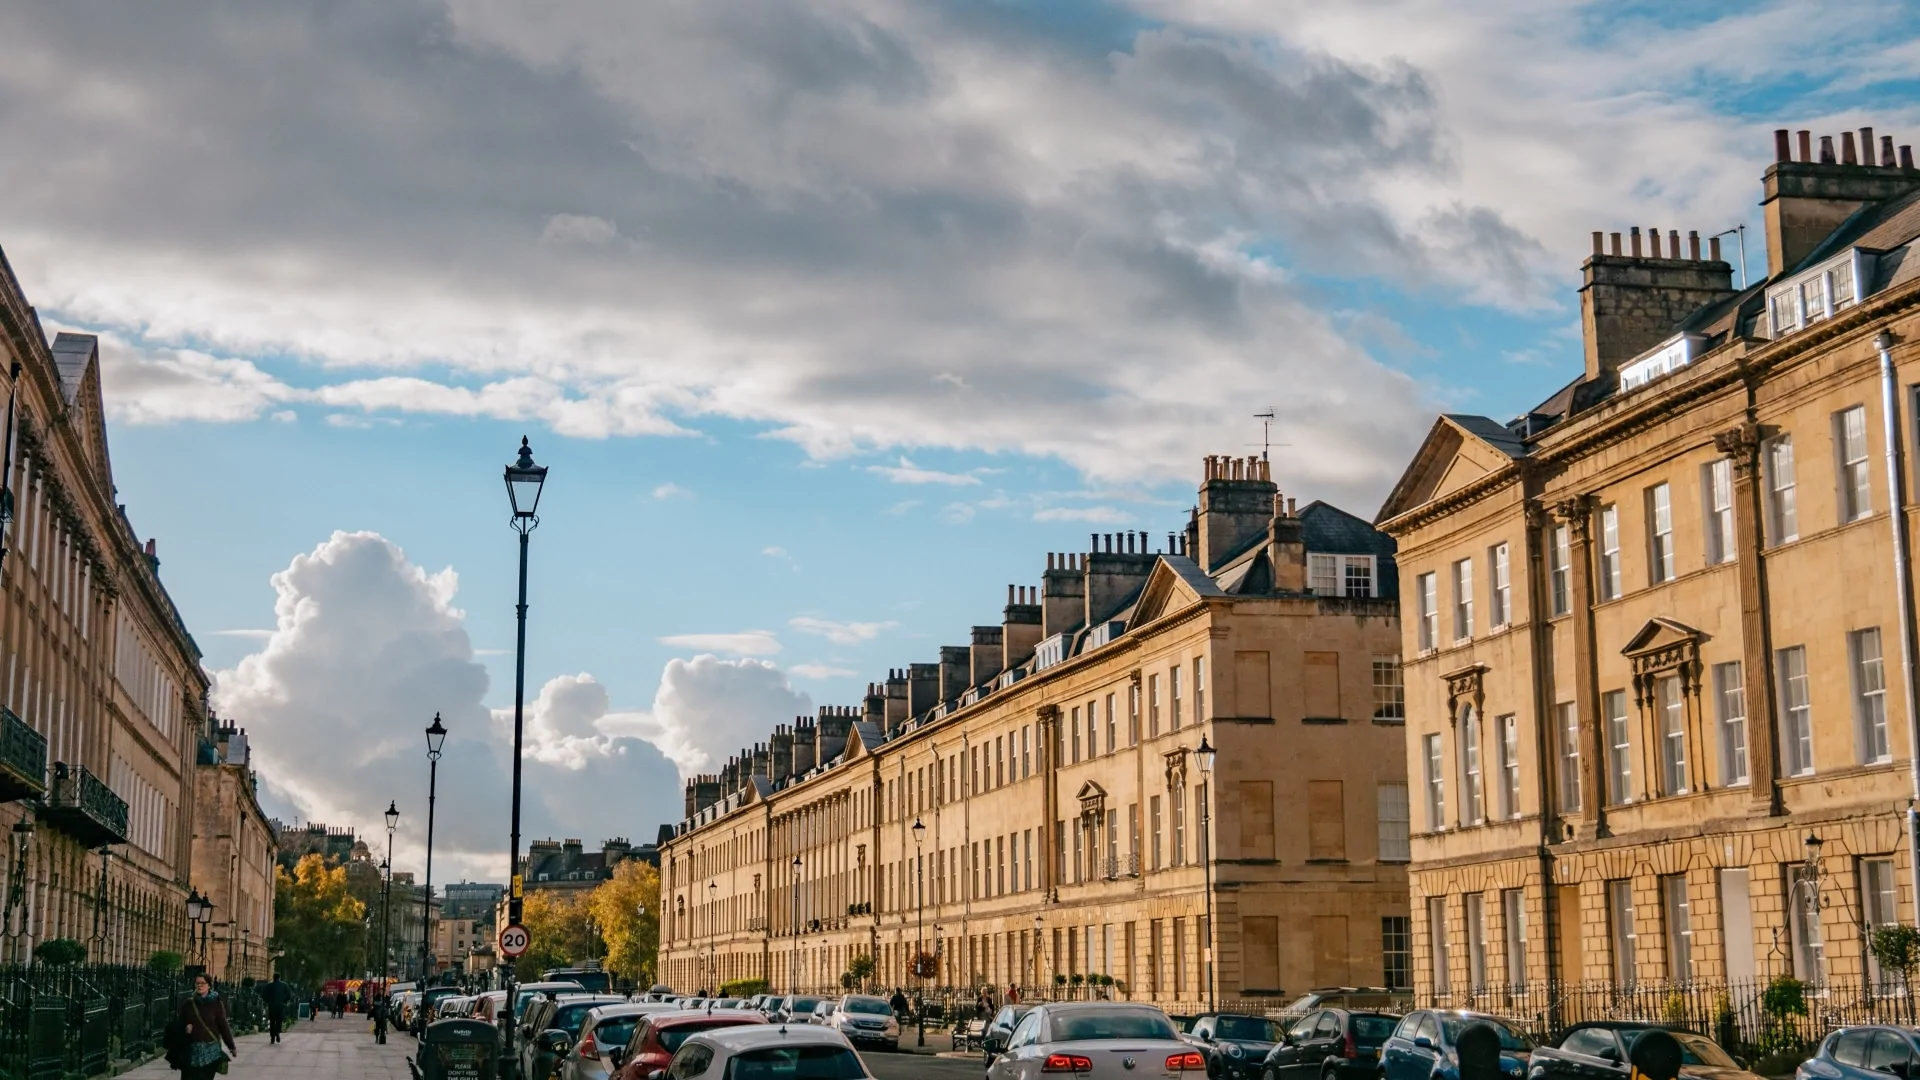 Great Pulteney Street shows grand houses on either side of the wide street and old-styled lamp posts.